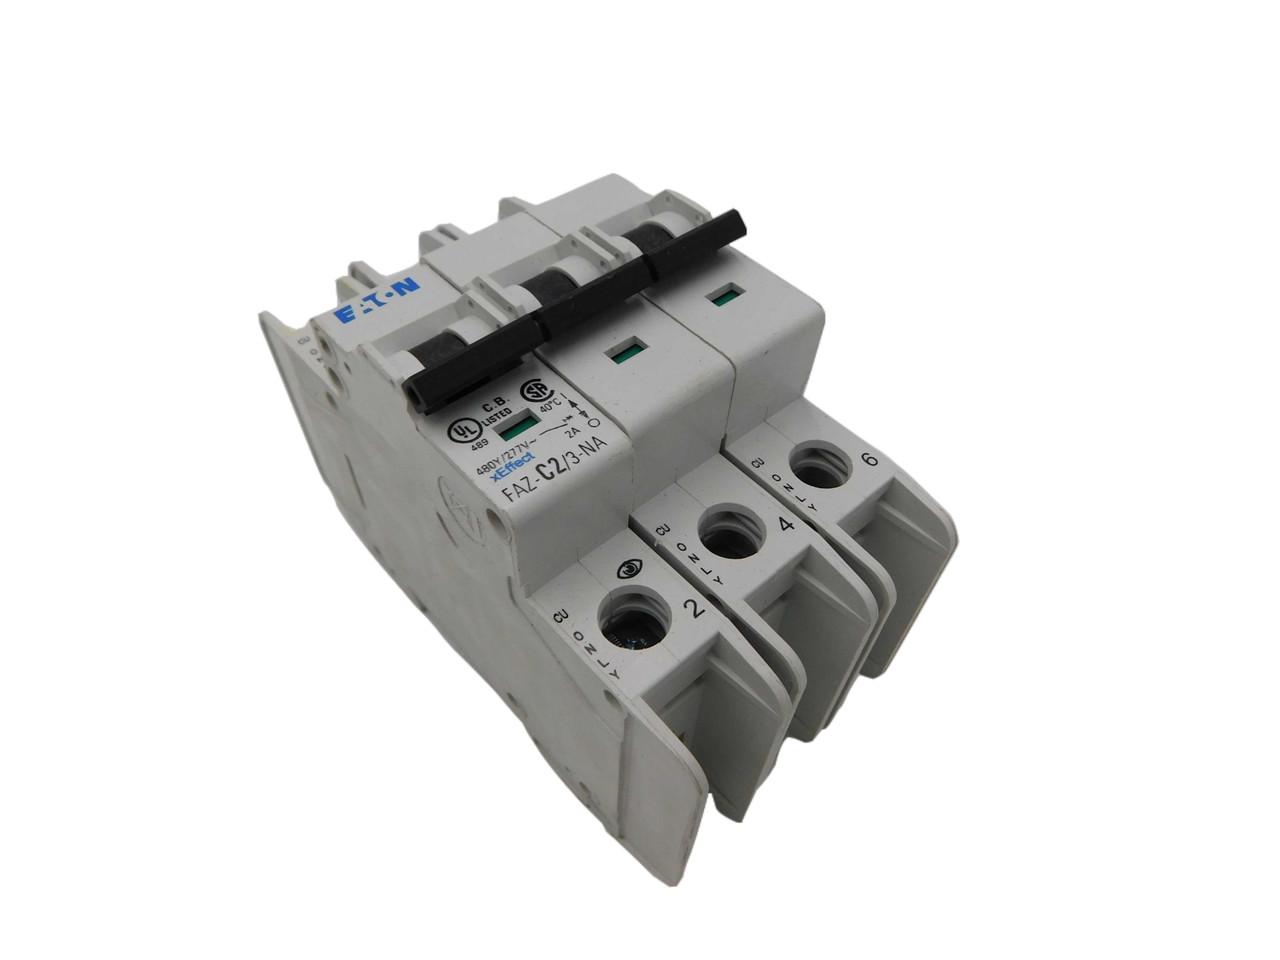 Eaton FAZ-C2/3-NA 277/480 VAC 50/60 Hz, 2 A, 3-Pole, 10/14 kA, 5 to 10 x Rated Current, Screw Terminal, DIN Rail Mount, Standard Packaging, C-Curve, Current Limiting, Thermal Magnetic